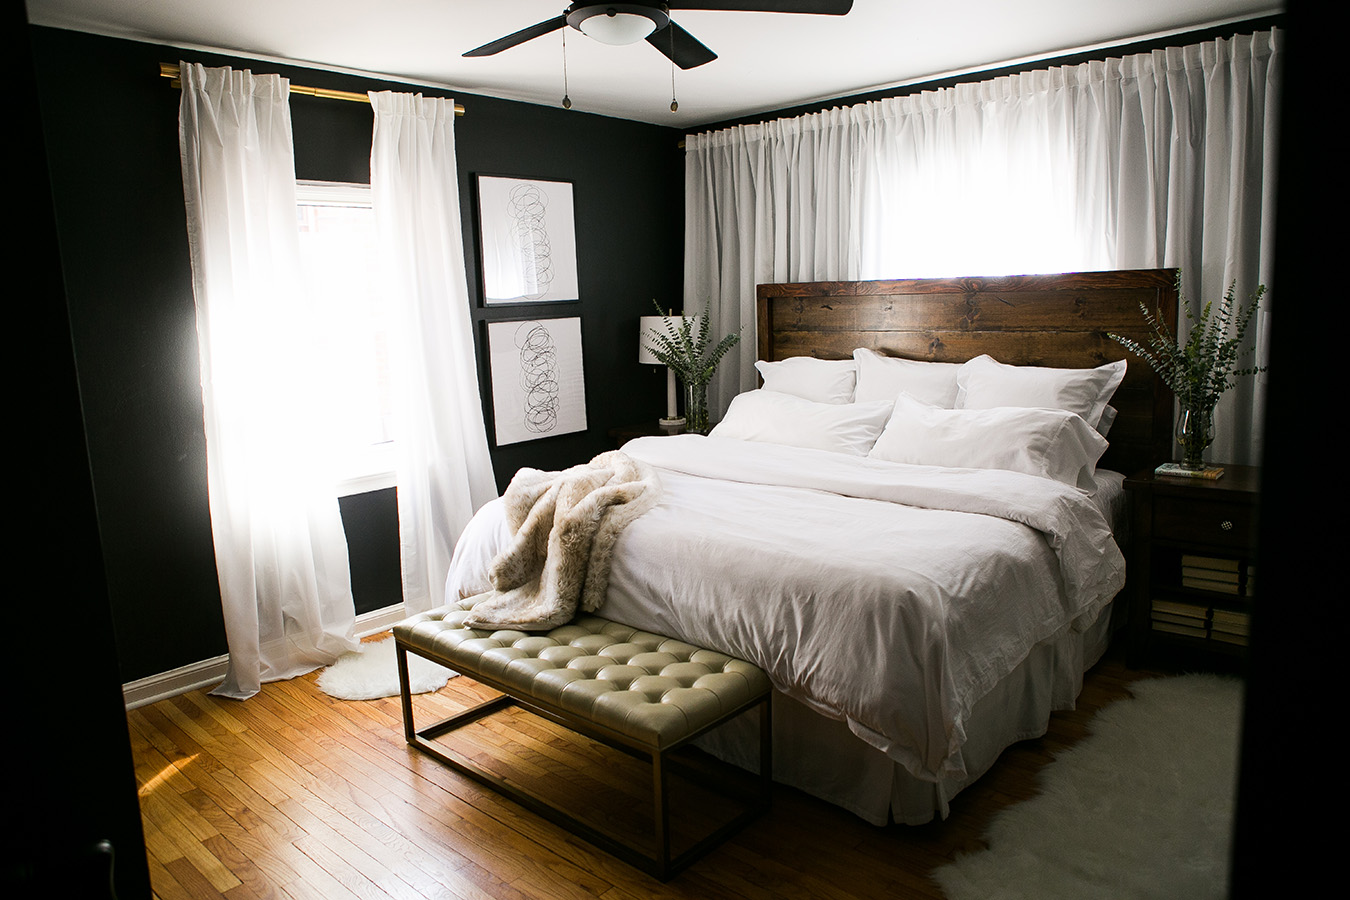 Stay on budget and in bed with these bedroom makeover tips